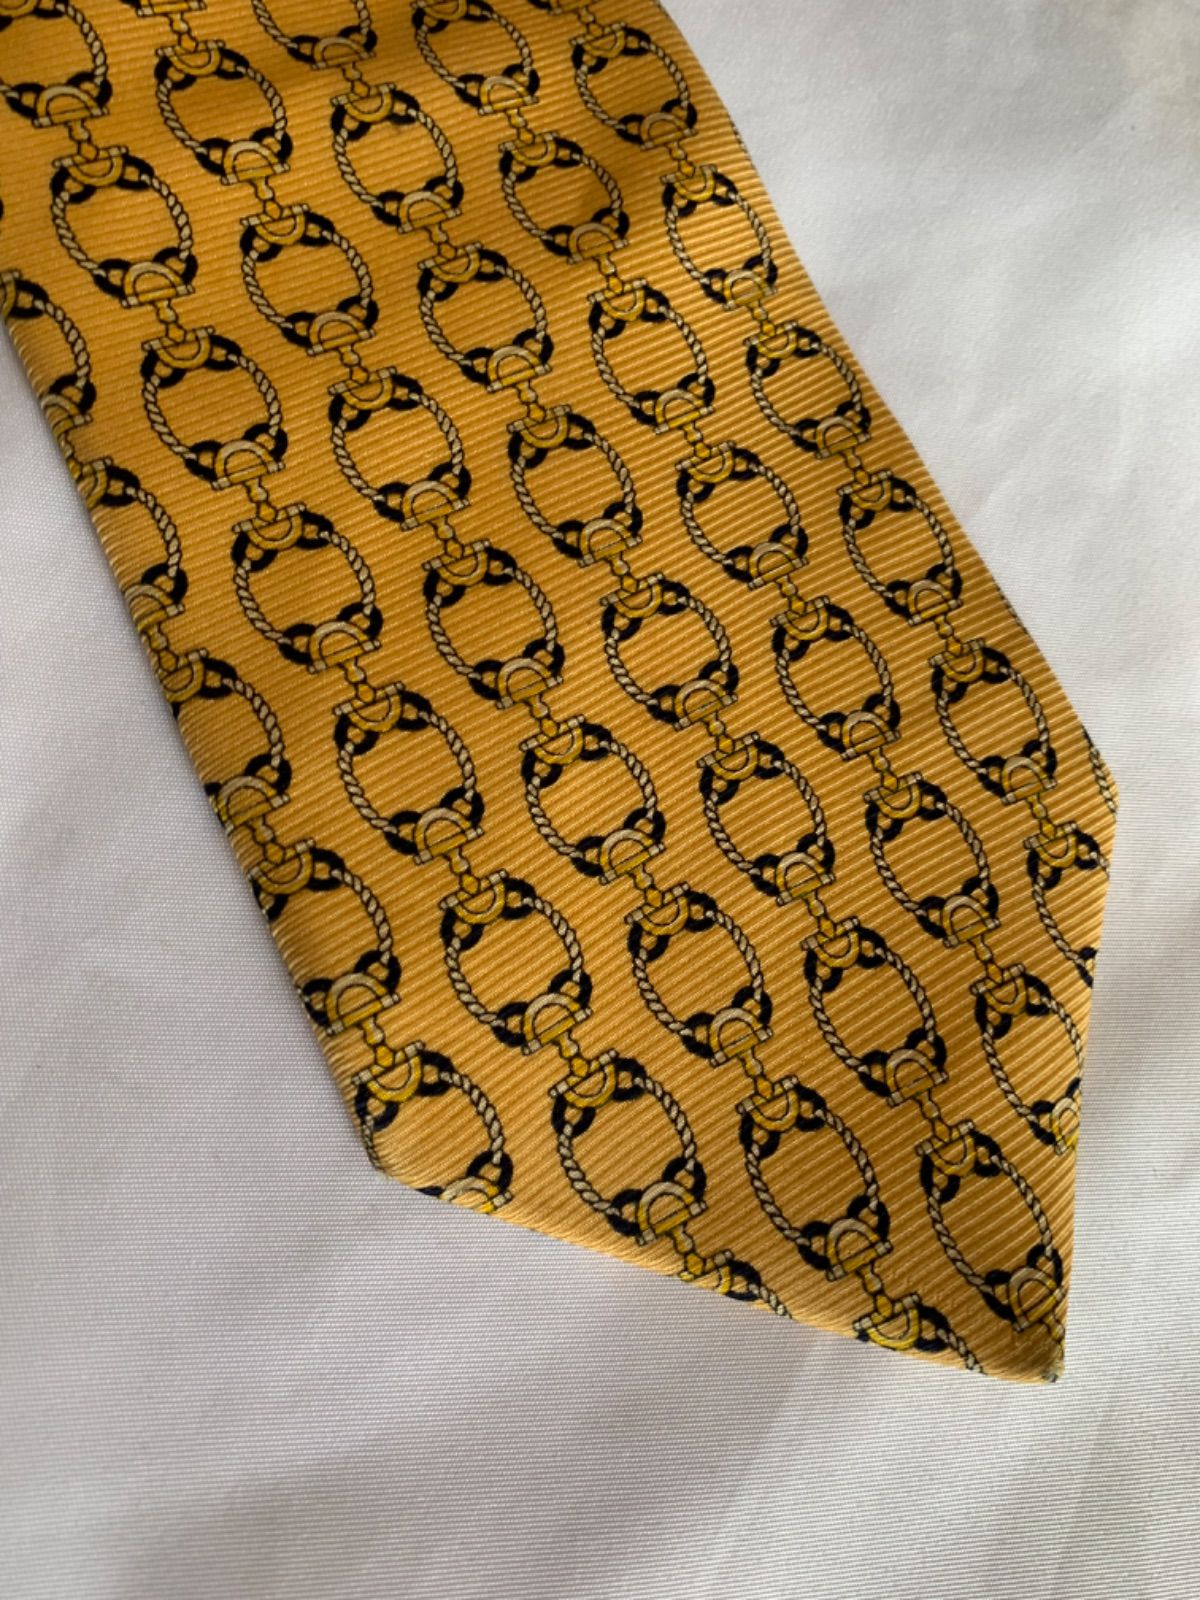 CORPOSANT Patterned Silk Tie コルポサント シルクタイ ネクタイ 総柄